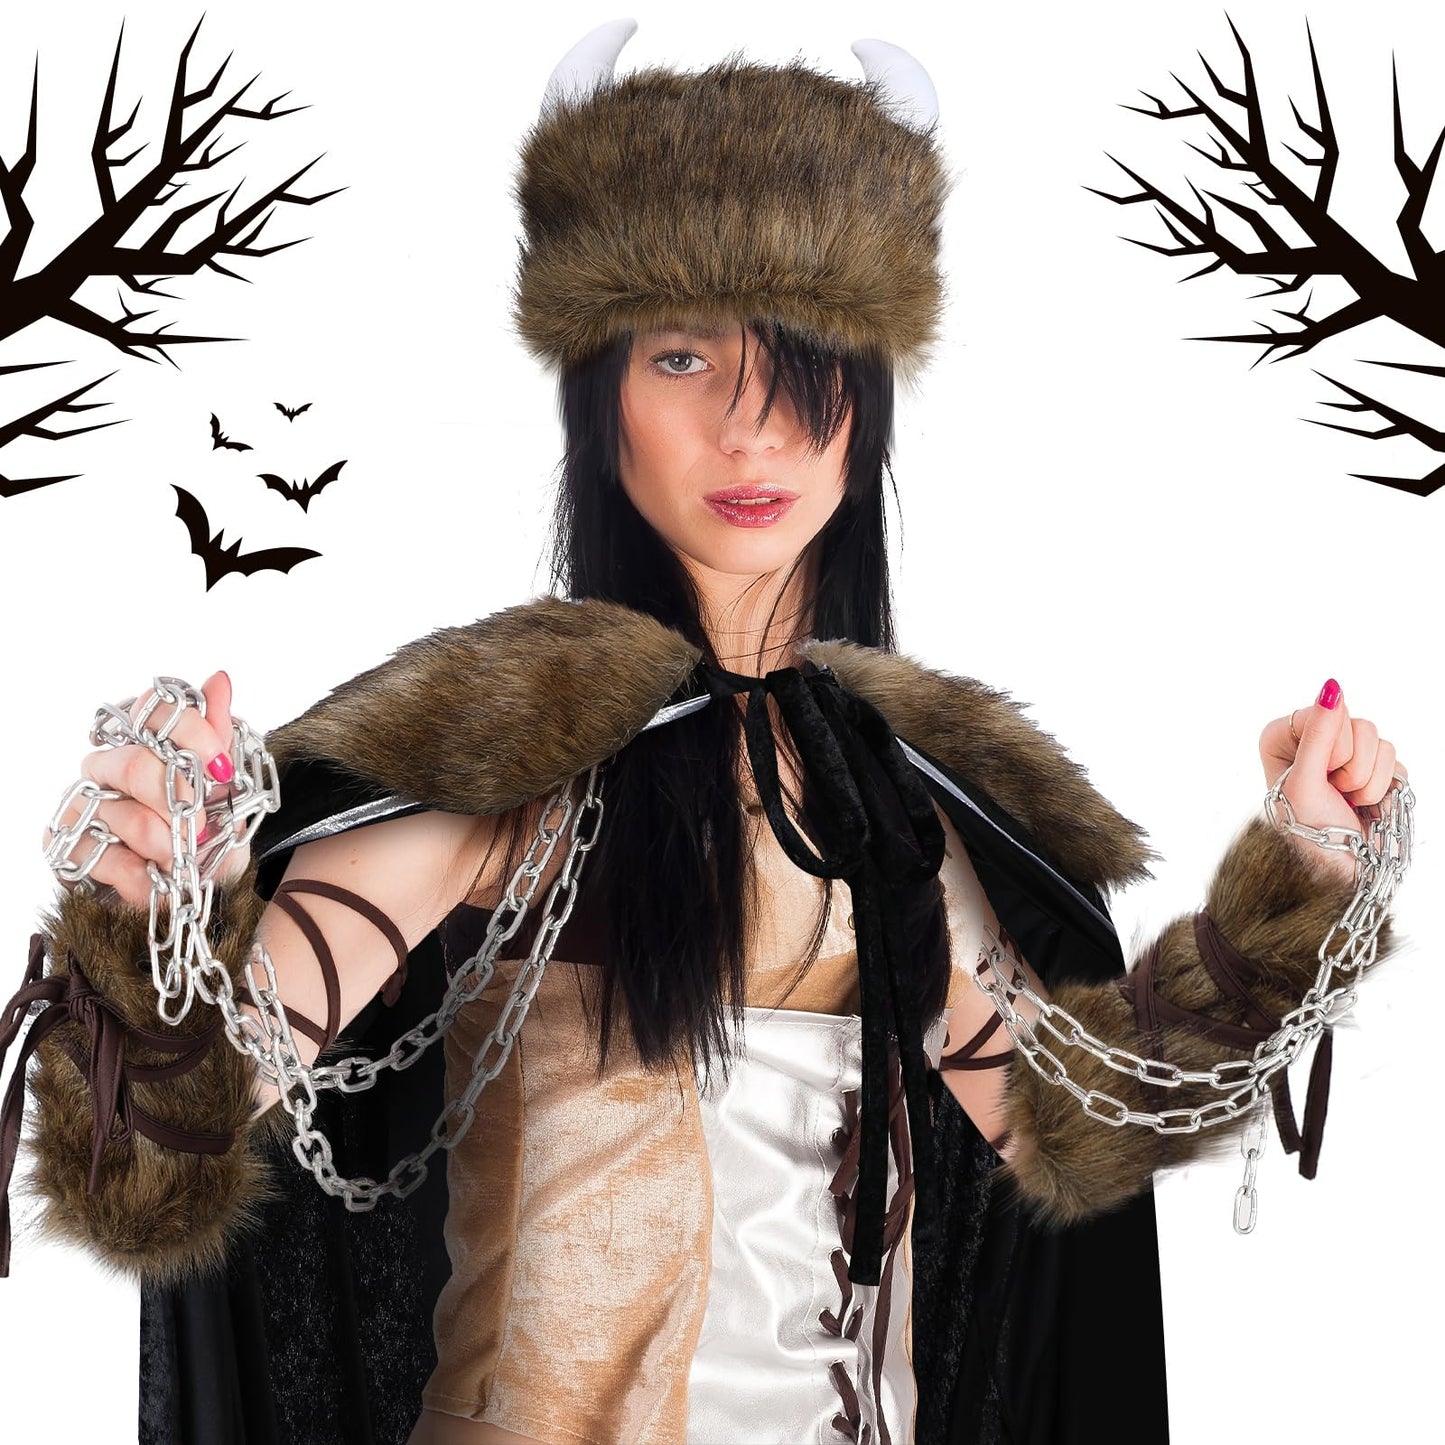 Jeyiour Women Viking Costumes Halloween Viking Warrior Costume Viking Costume with Faux Fur Collar Cape Hat Set for Women Halloween Cosplay Outfits